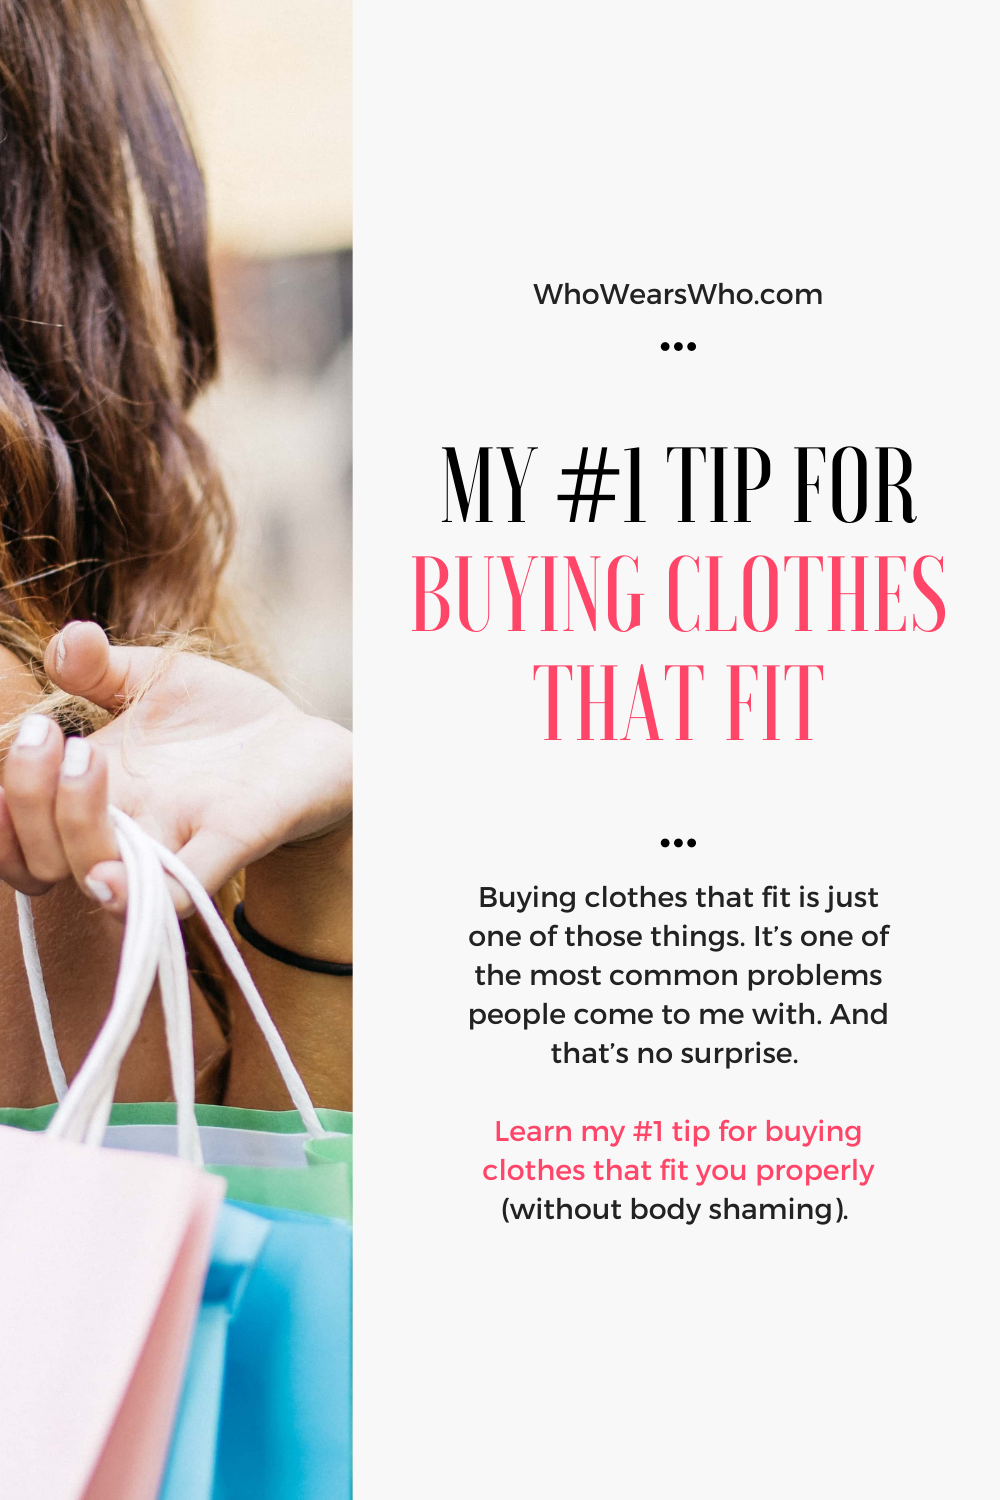 My #1 tip for buying clothes that fit